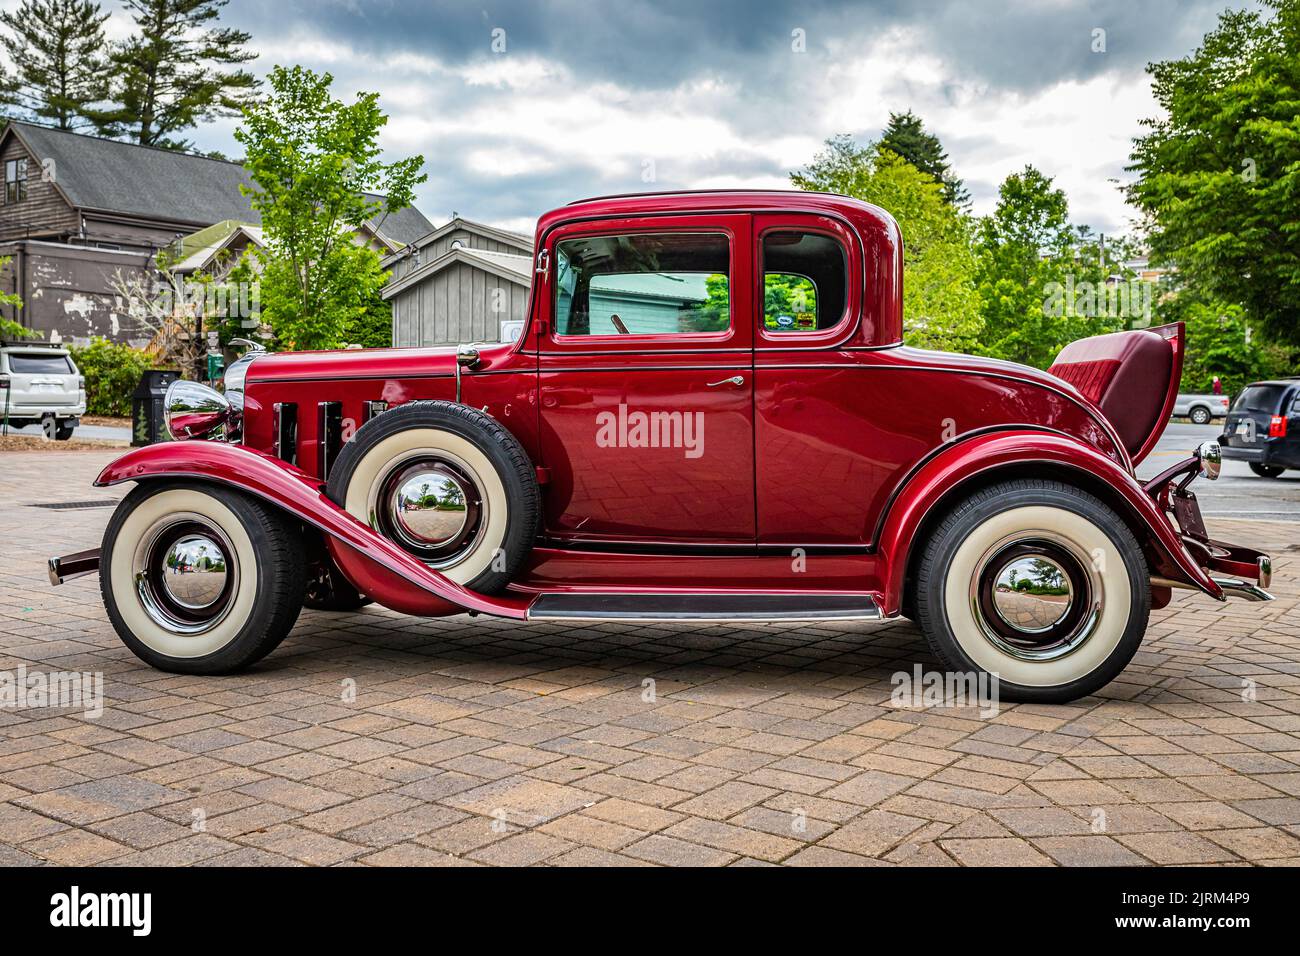 Highlands, NC - June 10, 2022:  Low perspective side view of a 1932 Chevrolet Rumble Seat Coupe at a local car show. Stock Photo